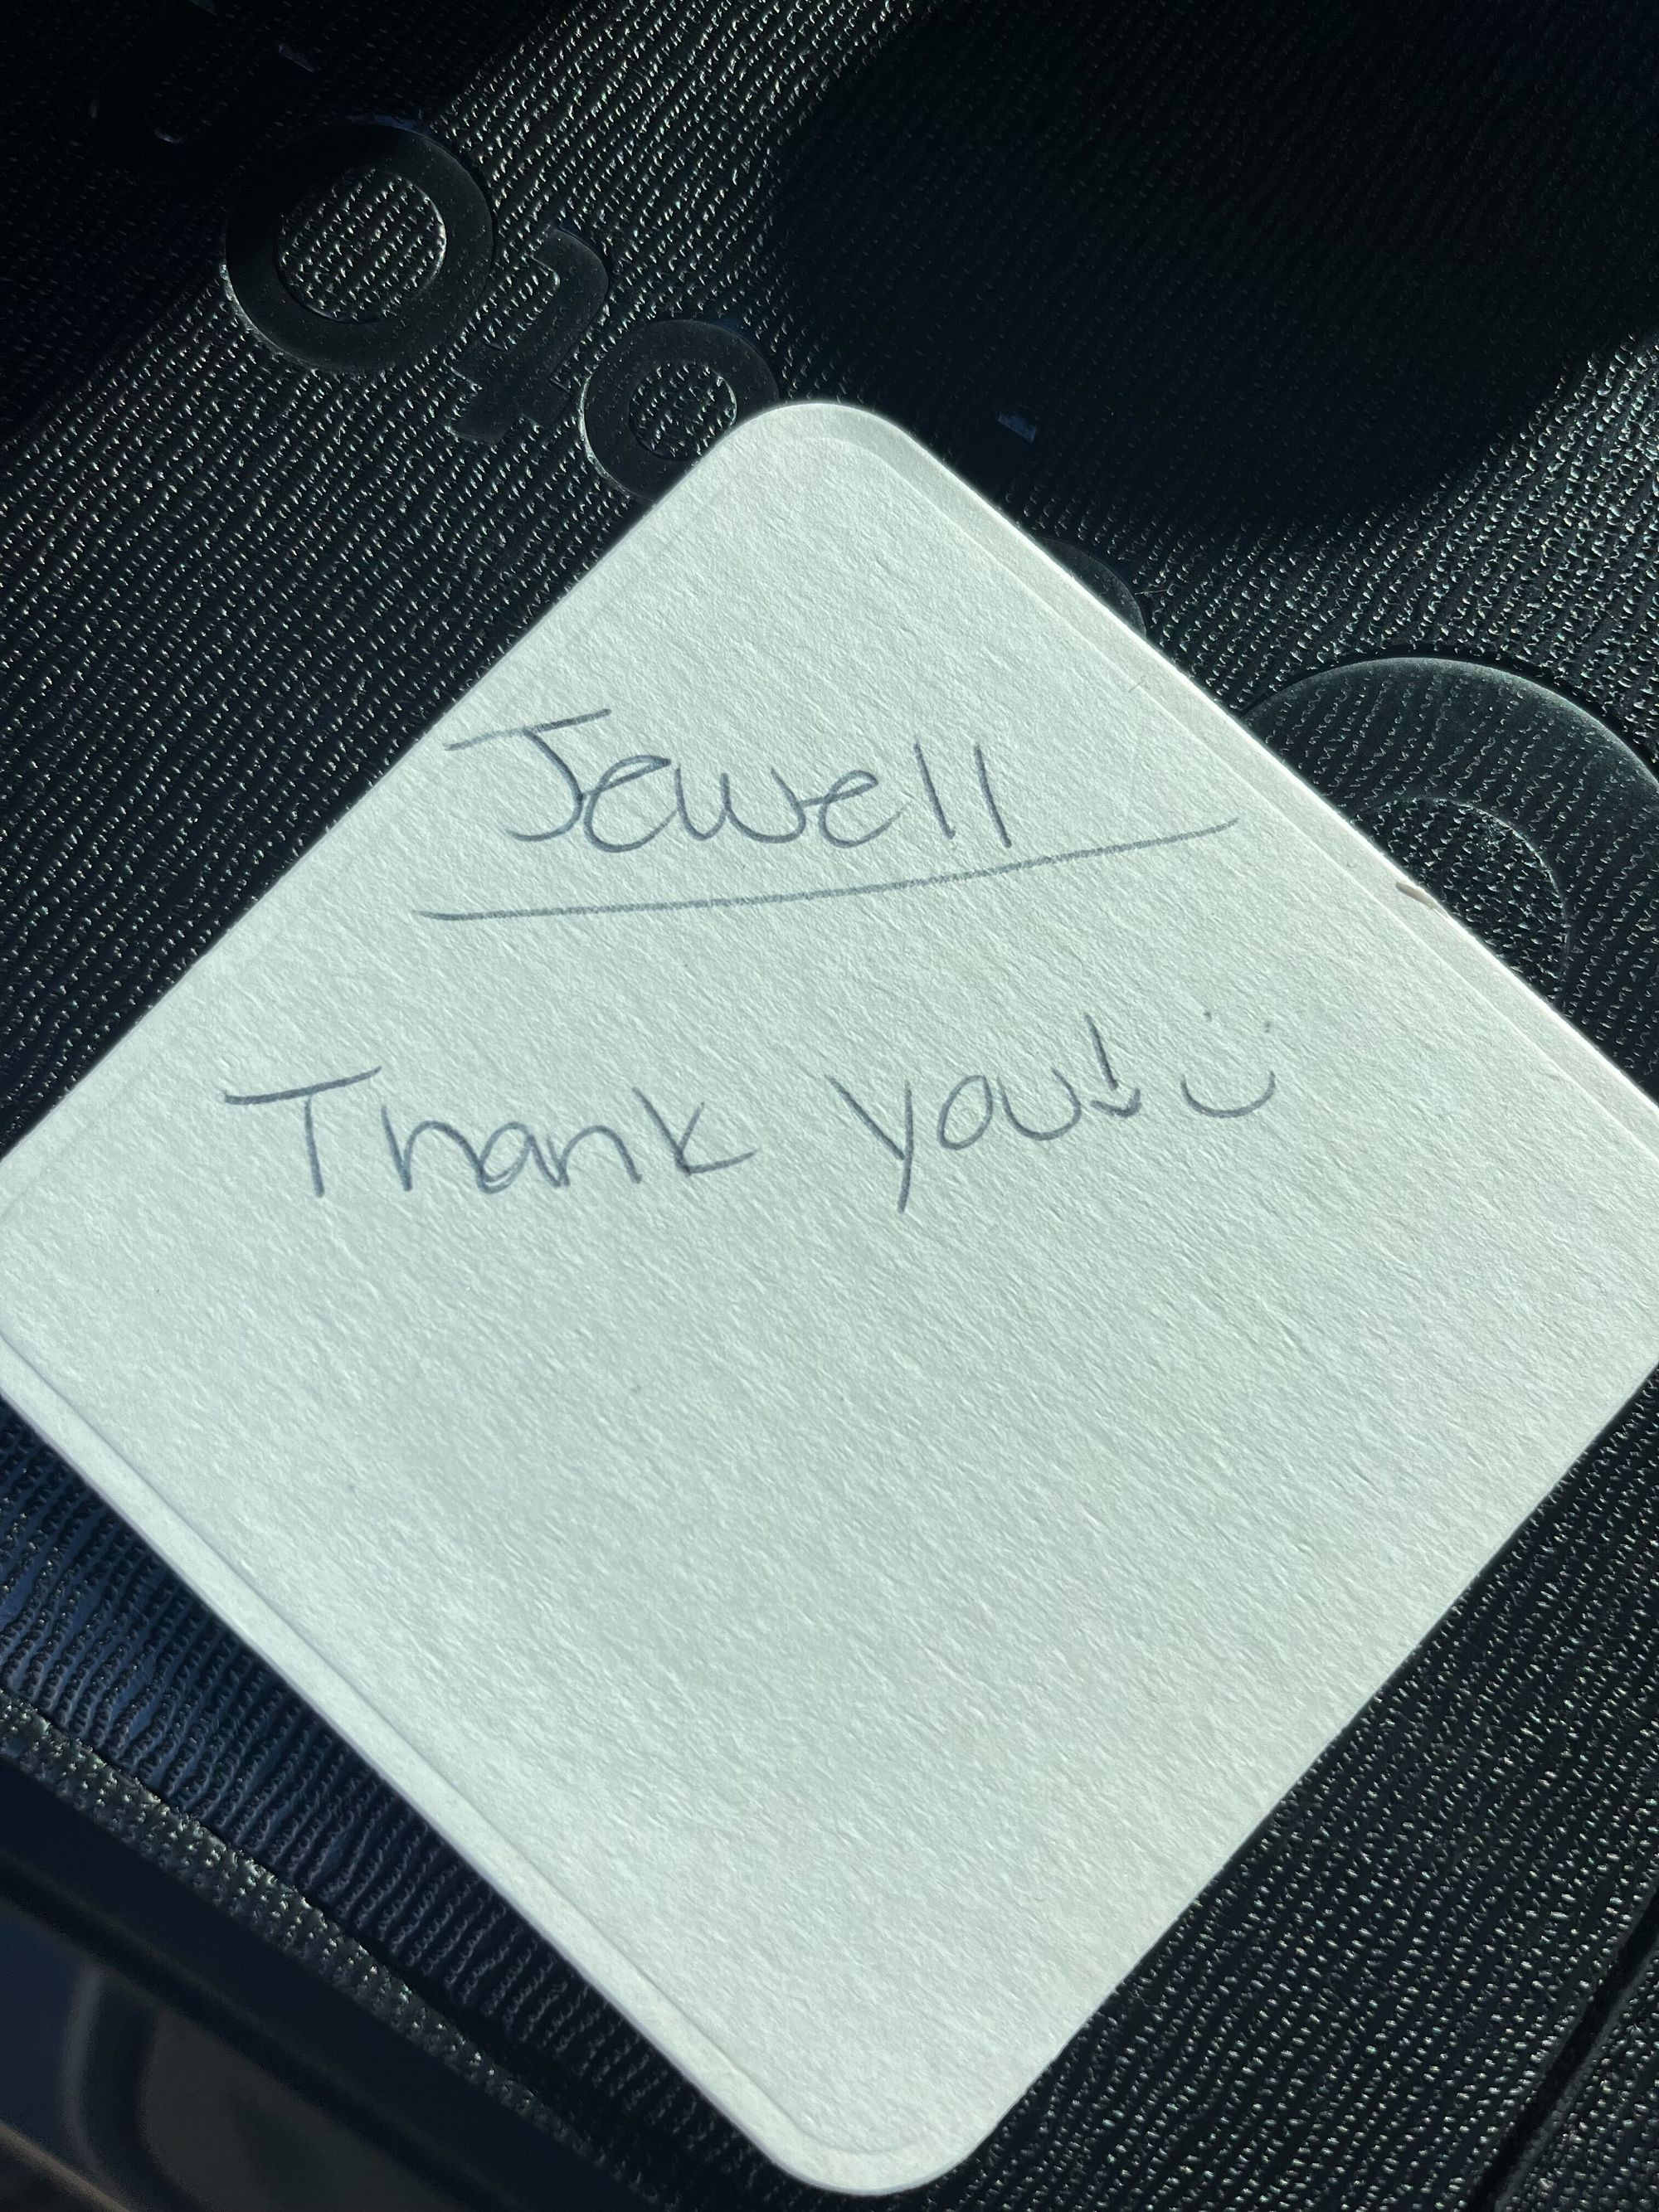 A thank you note placed on the SpotOn bar point-of-sale system